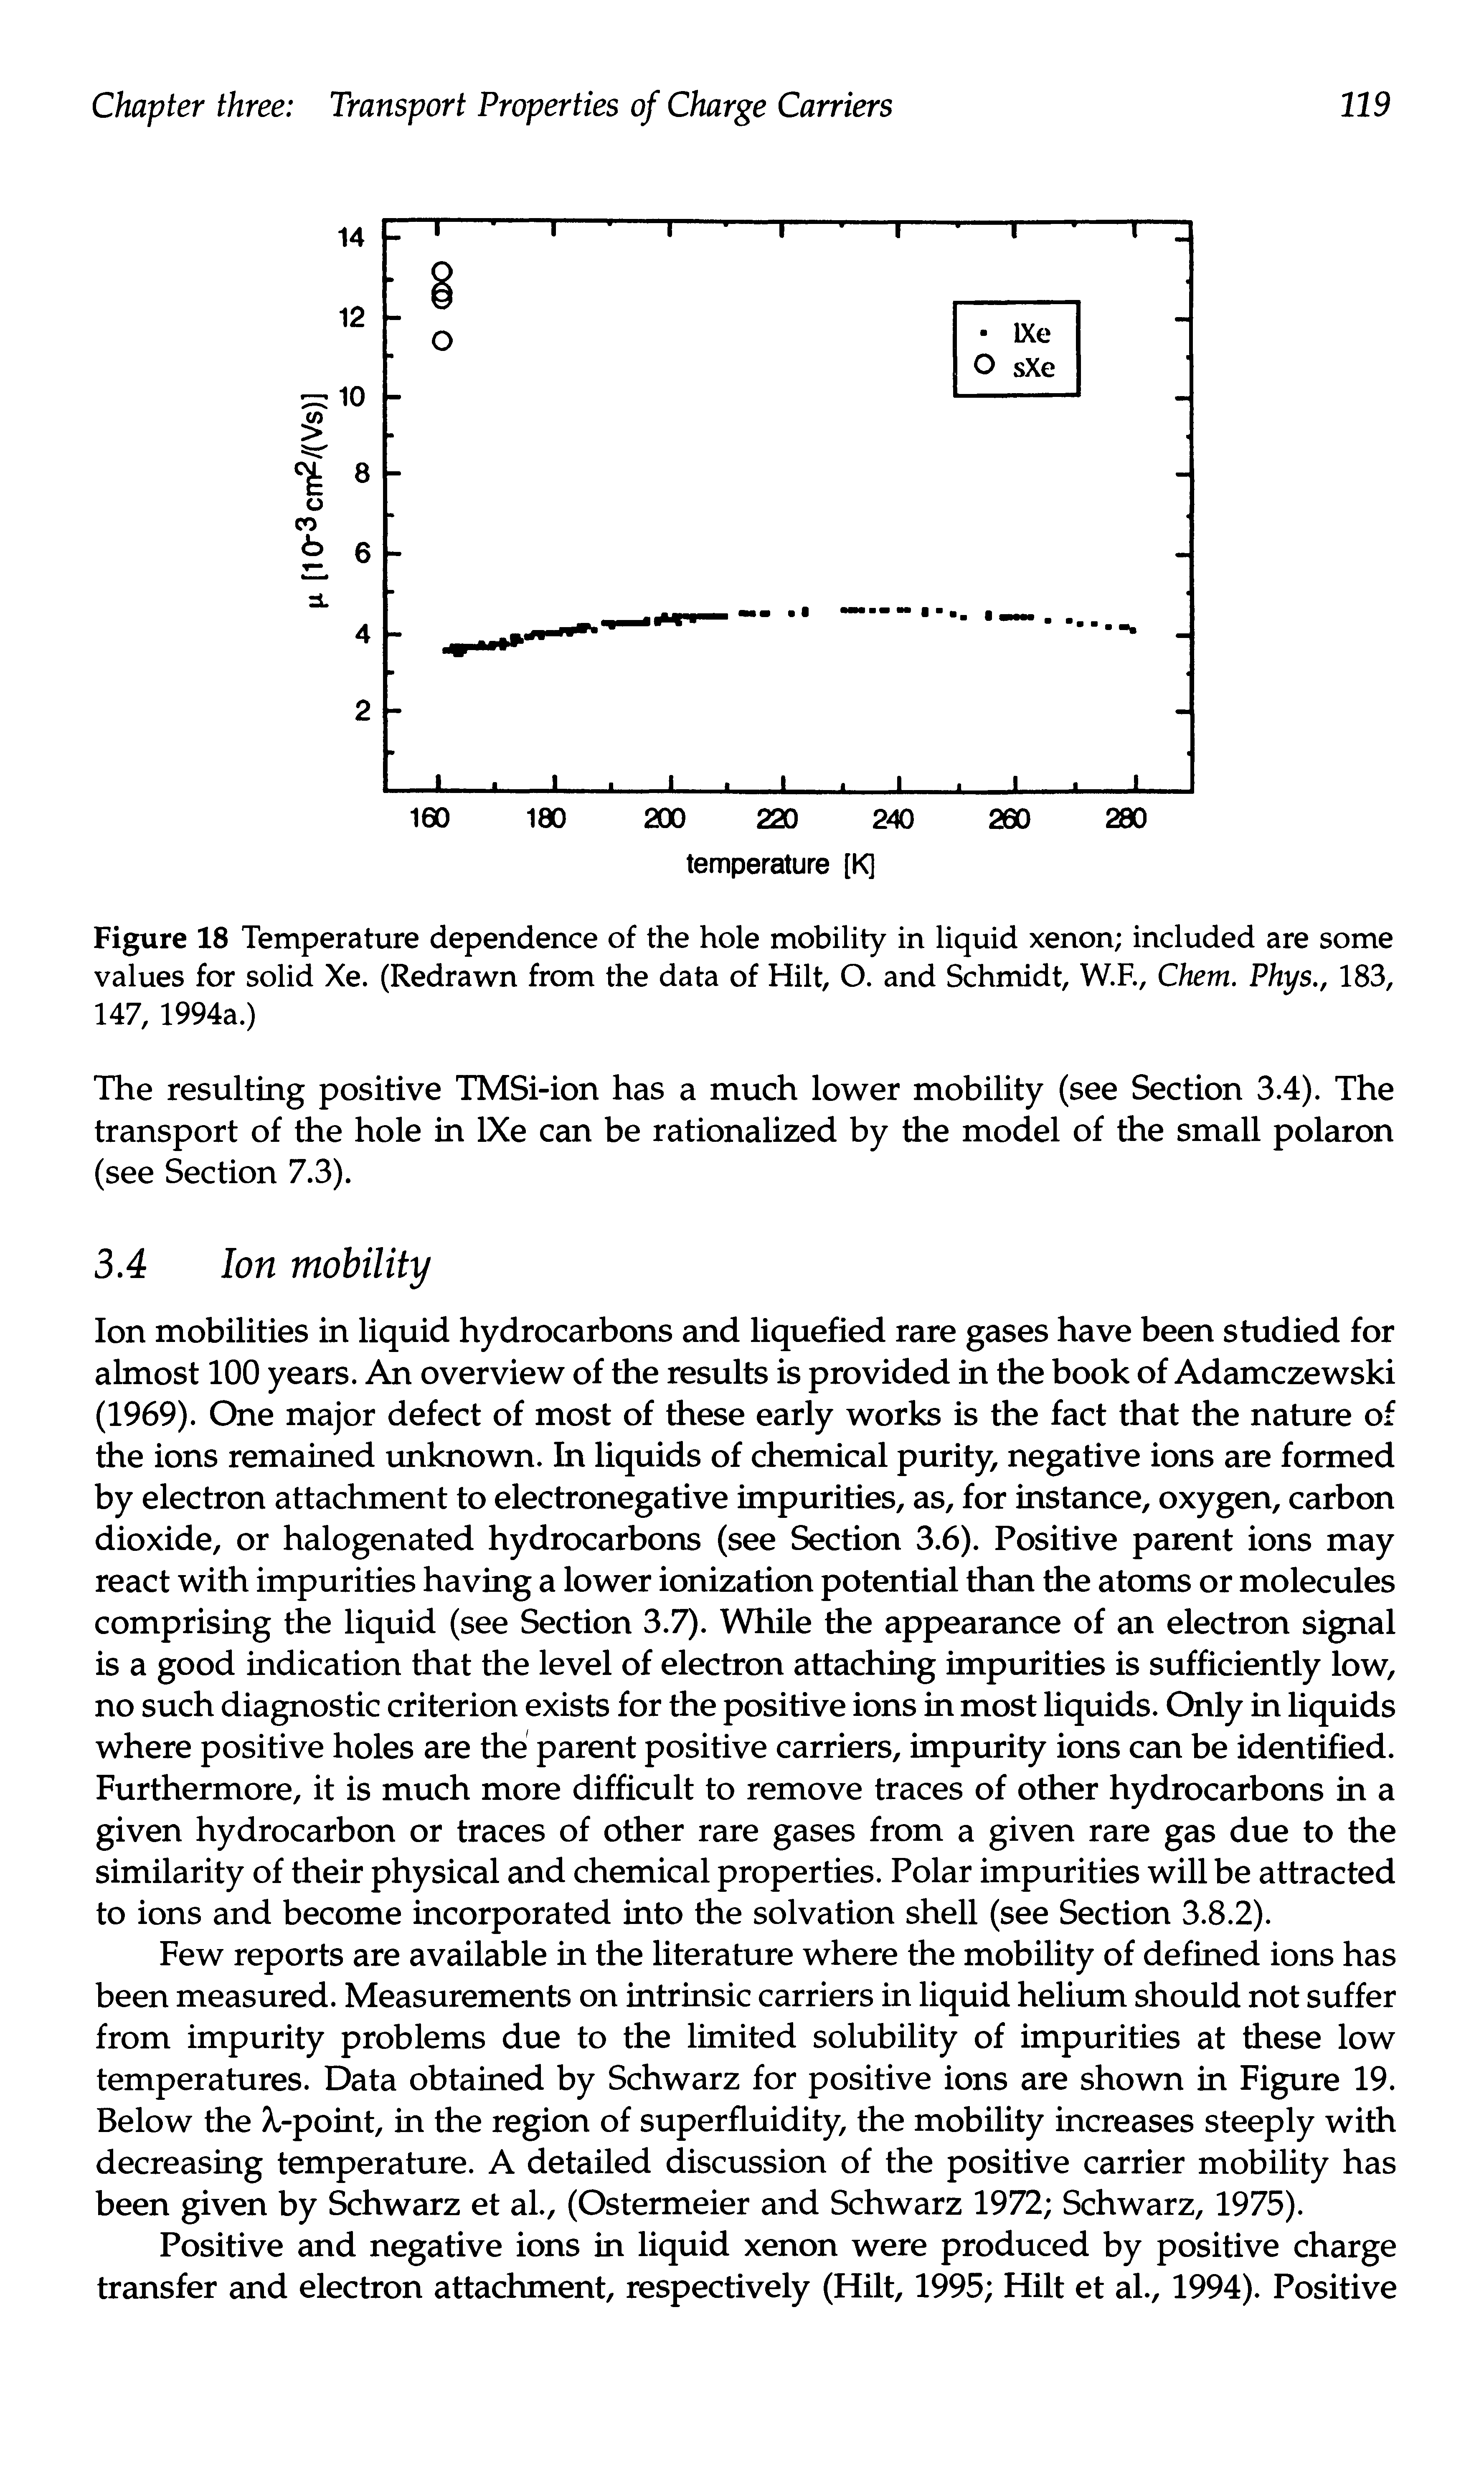 Figure 18 Temperature dependence of the hole mobility in liquid xenon included are some values for solid Xe. (Redrawn from the data of Hilt, O. and Schmidt, W.F., Chem. Phys., 183, 147, 1994a.)...